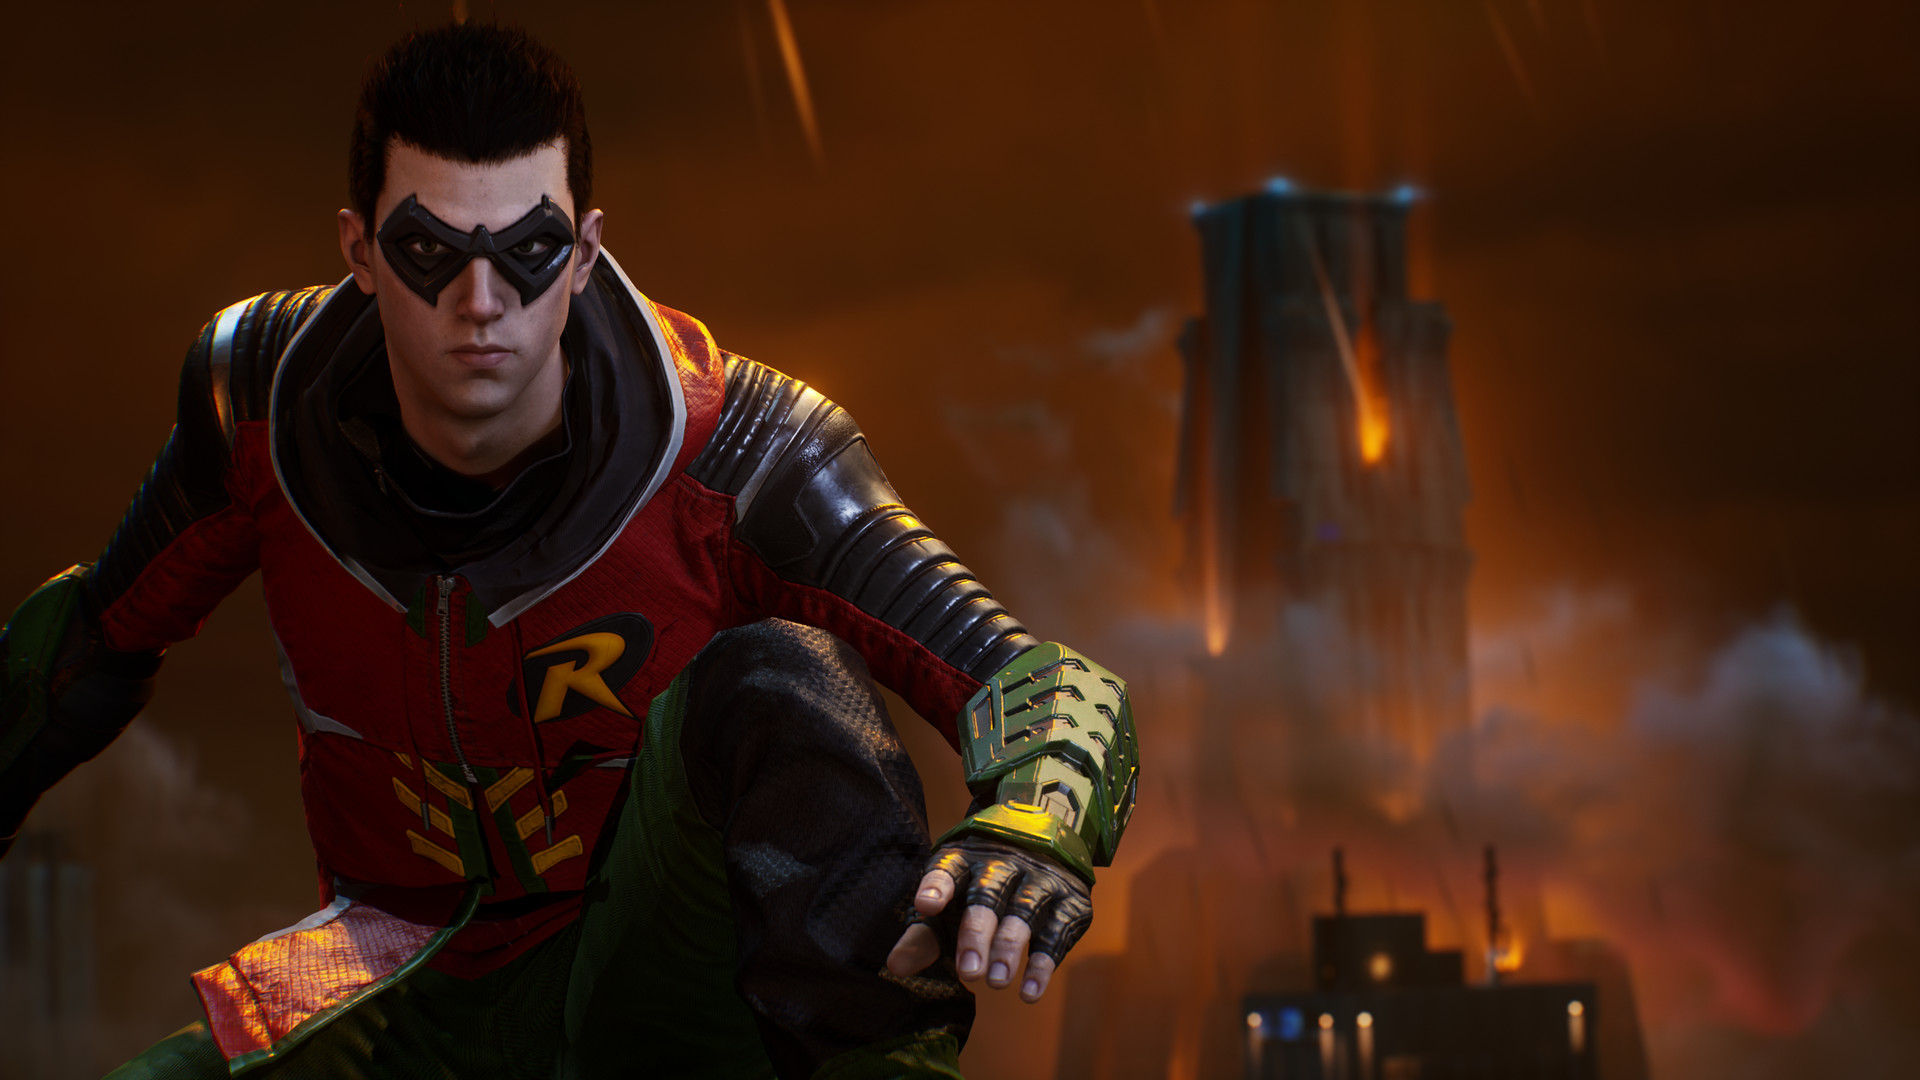 Divisive reviews are the bane of Gotham Knights - Xfire